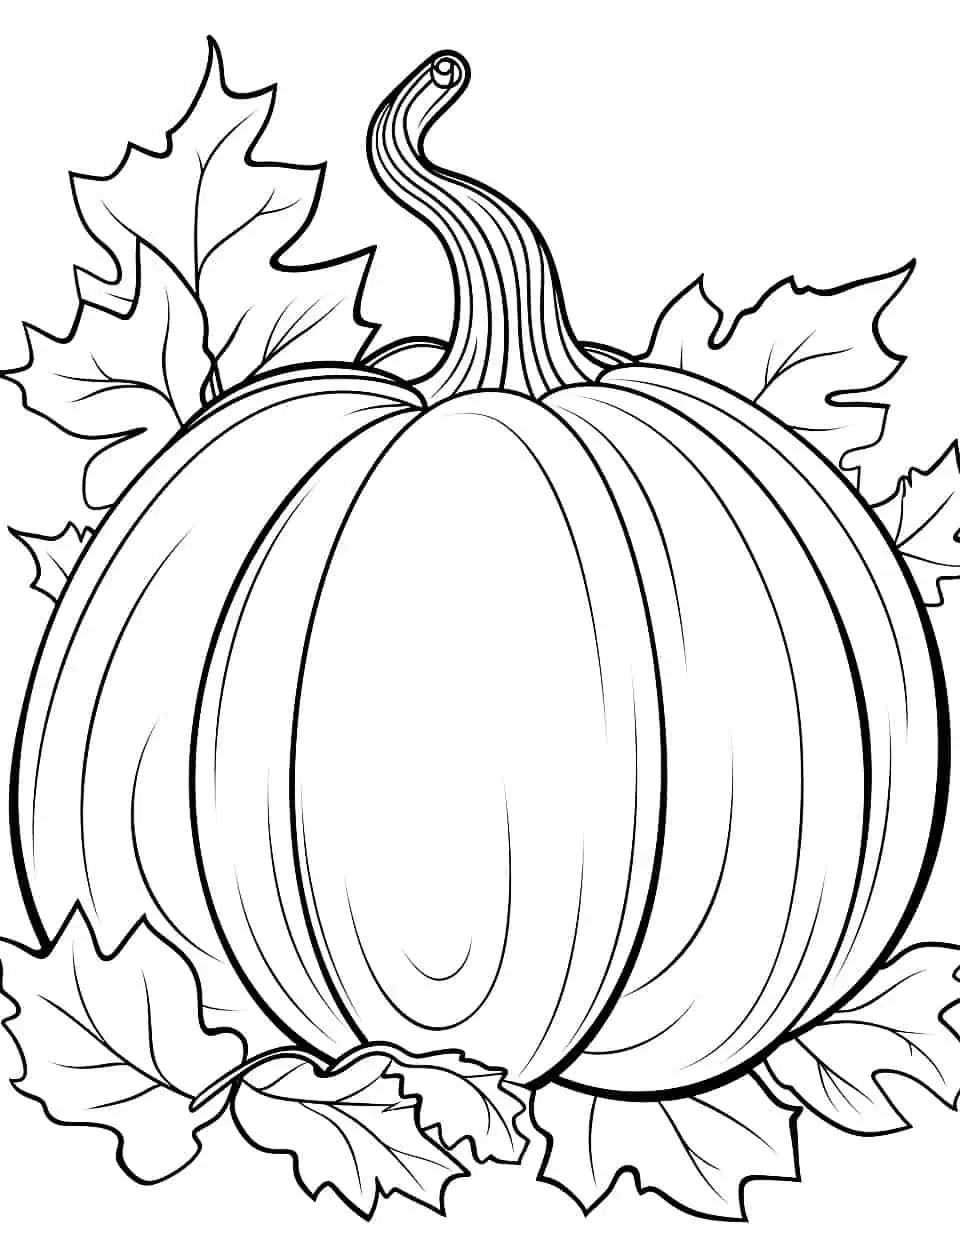 Pumpkin and Fall Leaves Coloring Page - A pumpkin surrounded by colorful fall leaves, showcasing the beauty of the season.